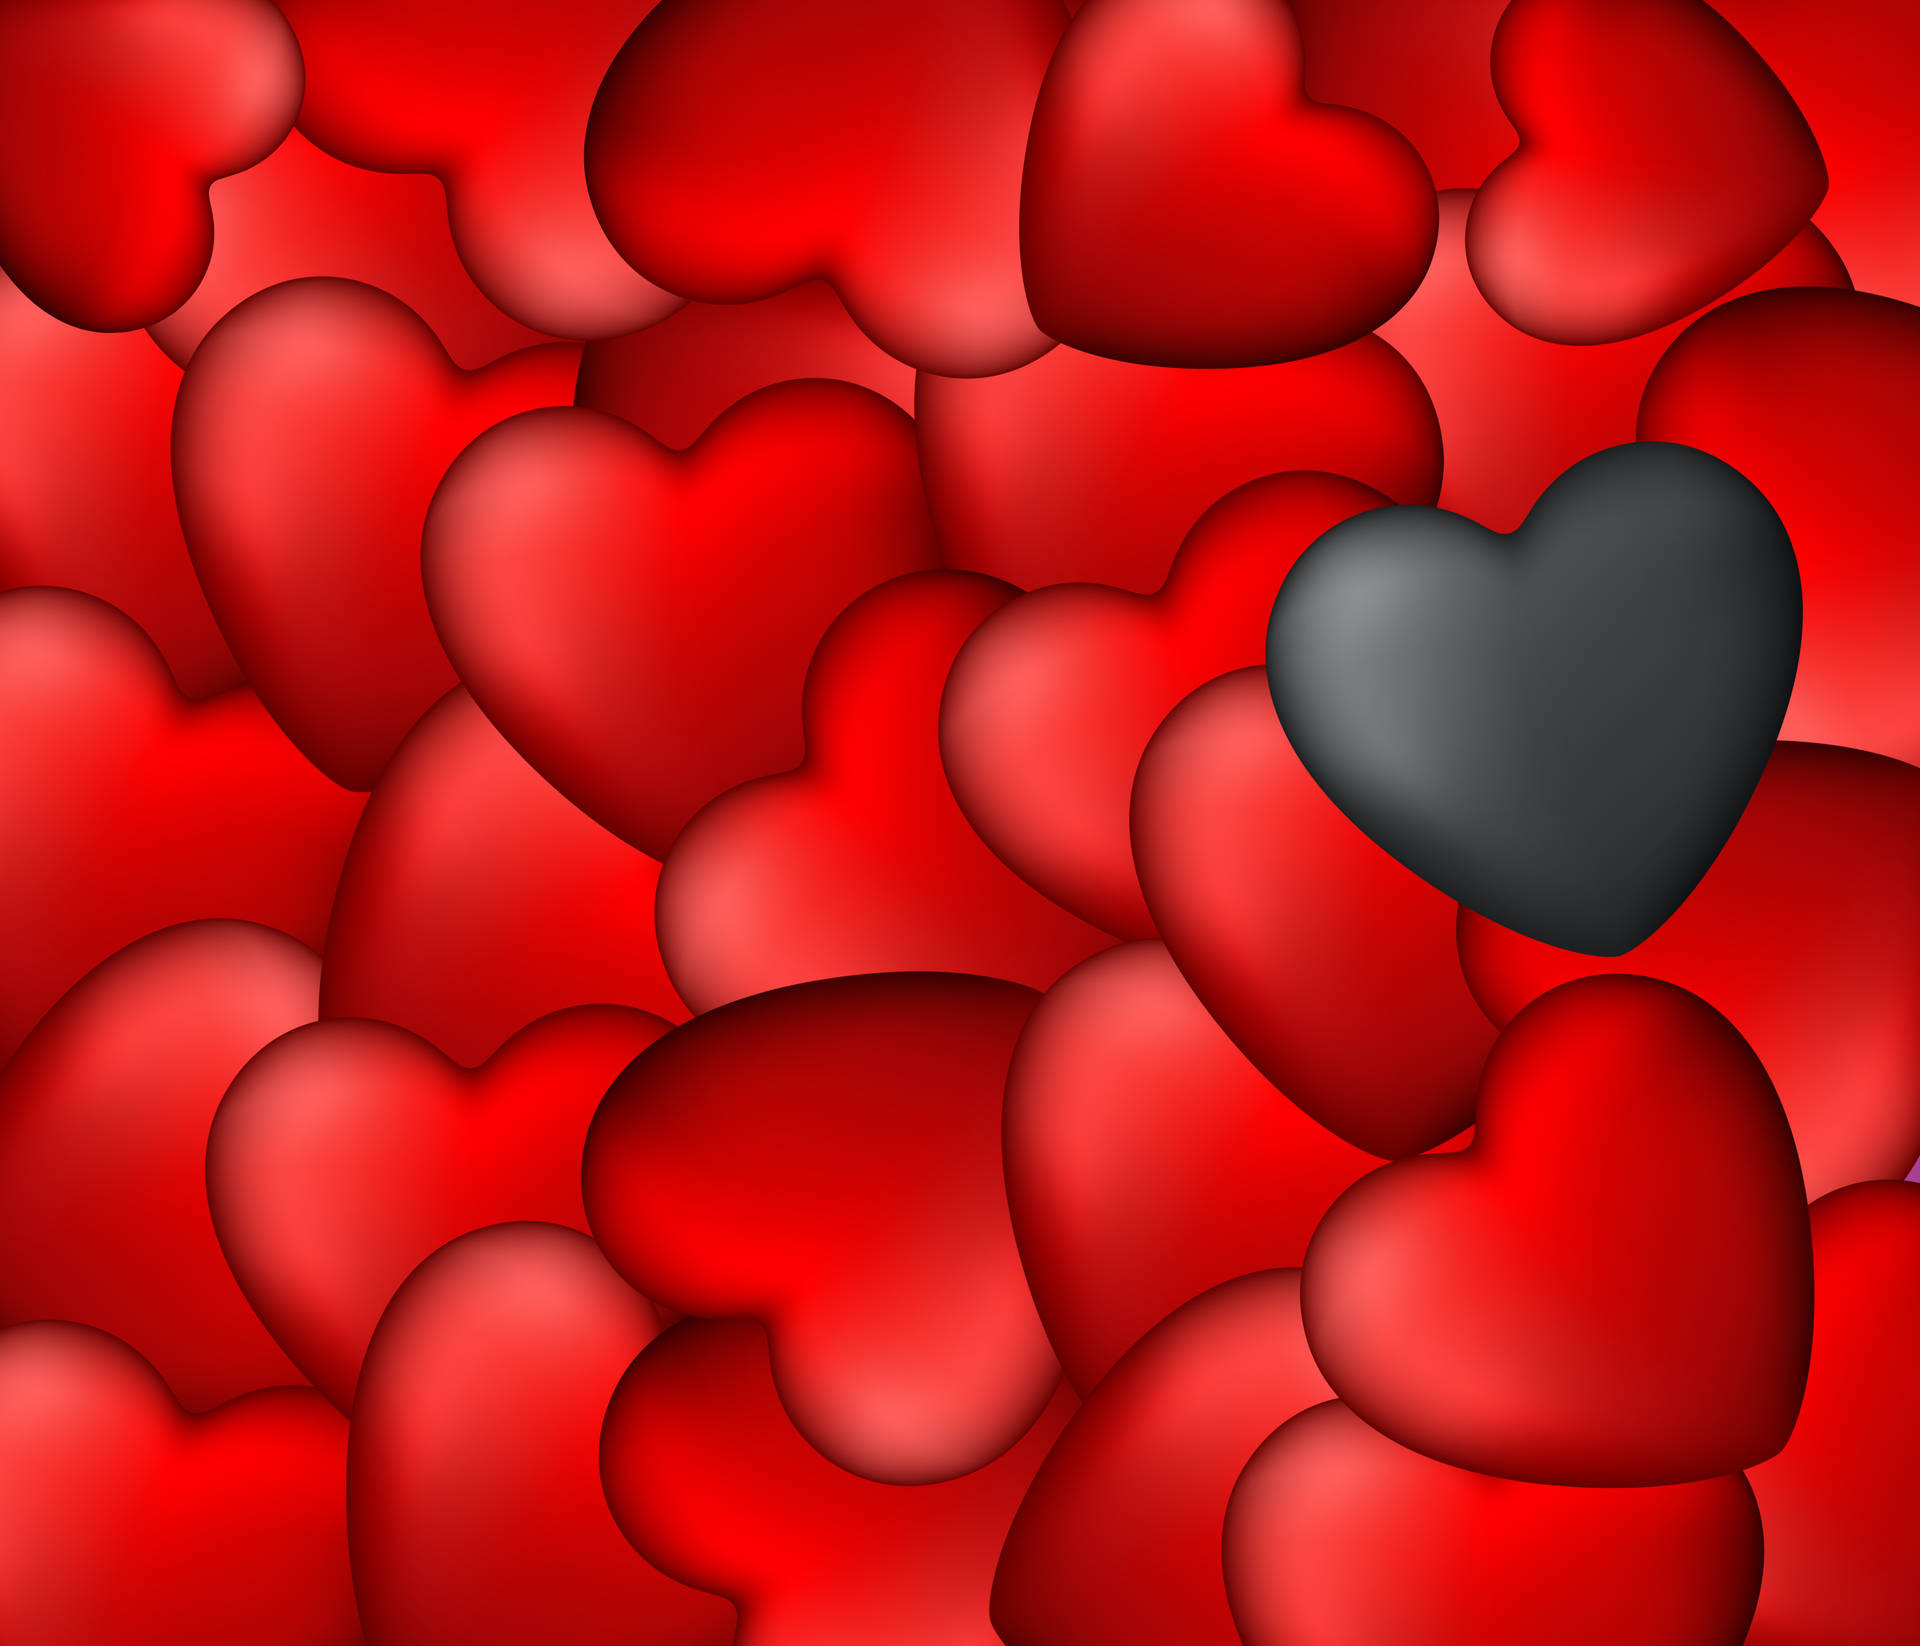 Spread the love with these beautiful Red and Black hearts! Wallpaper